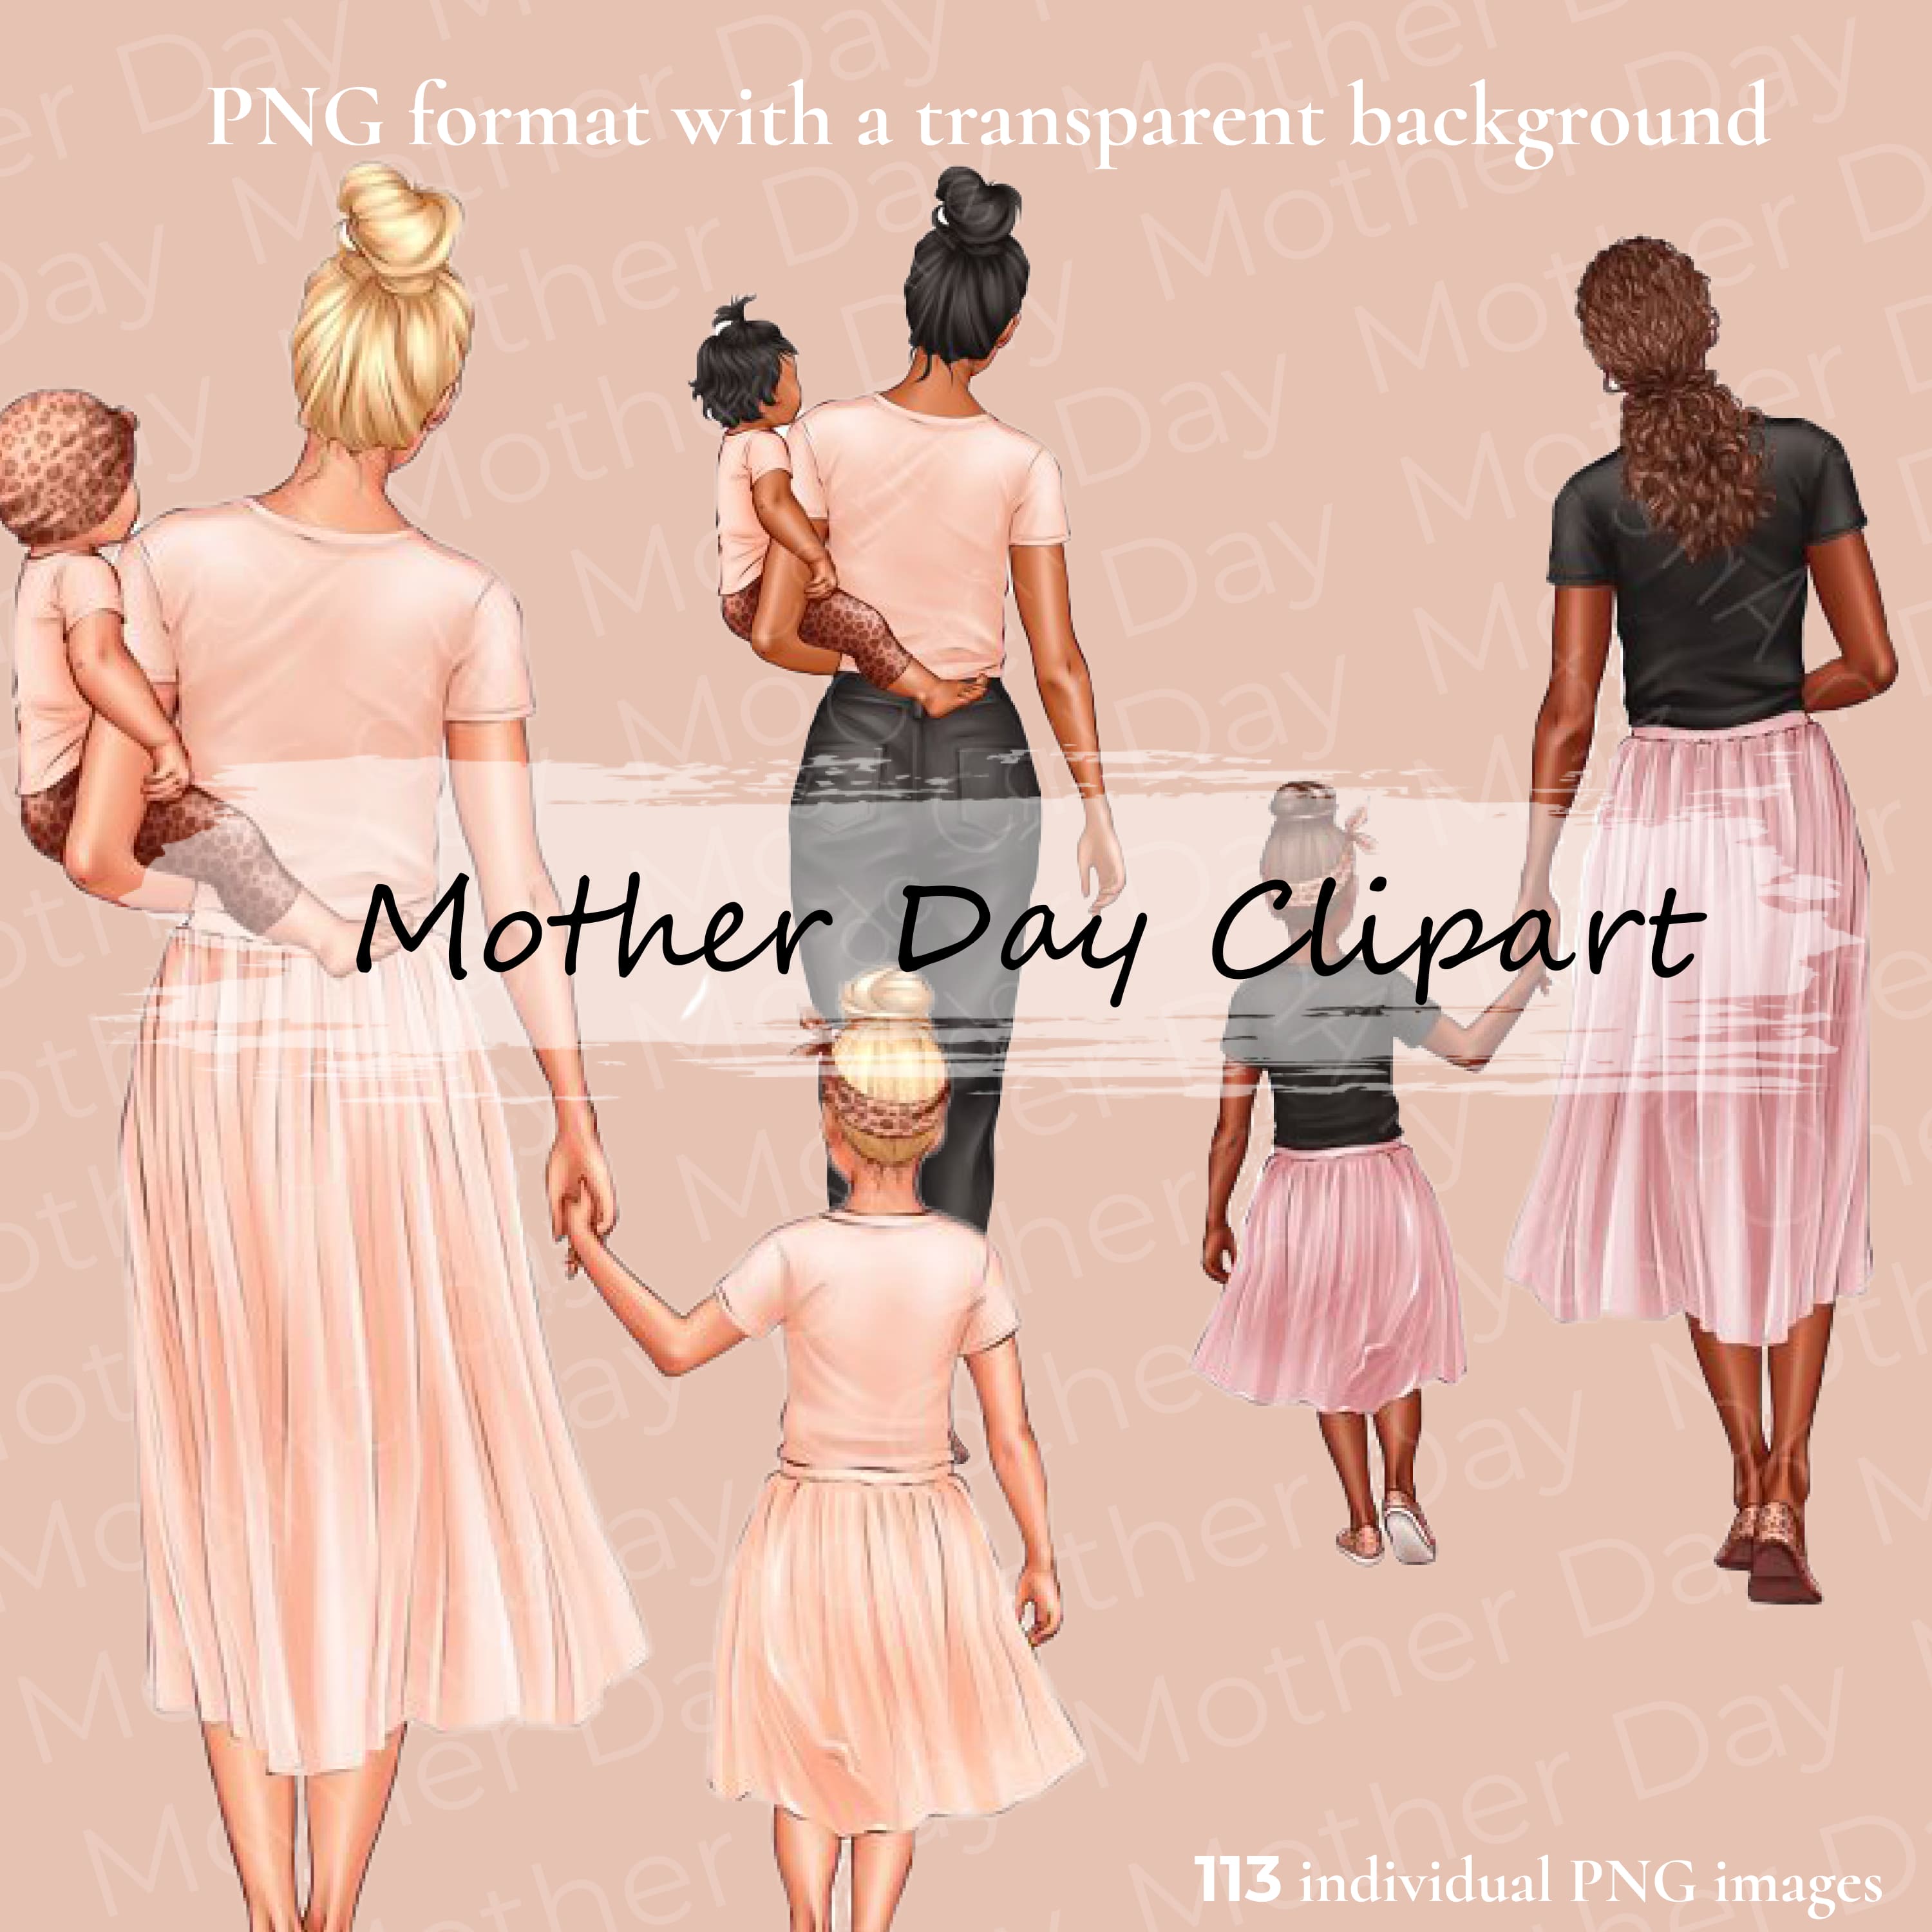 Best Mom Clipart, Mother Day Clipart cover.